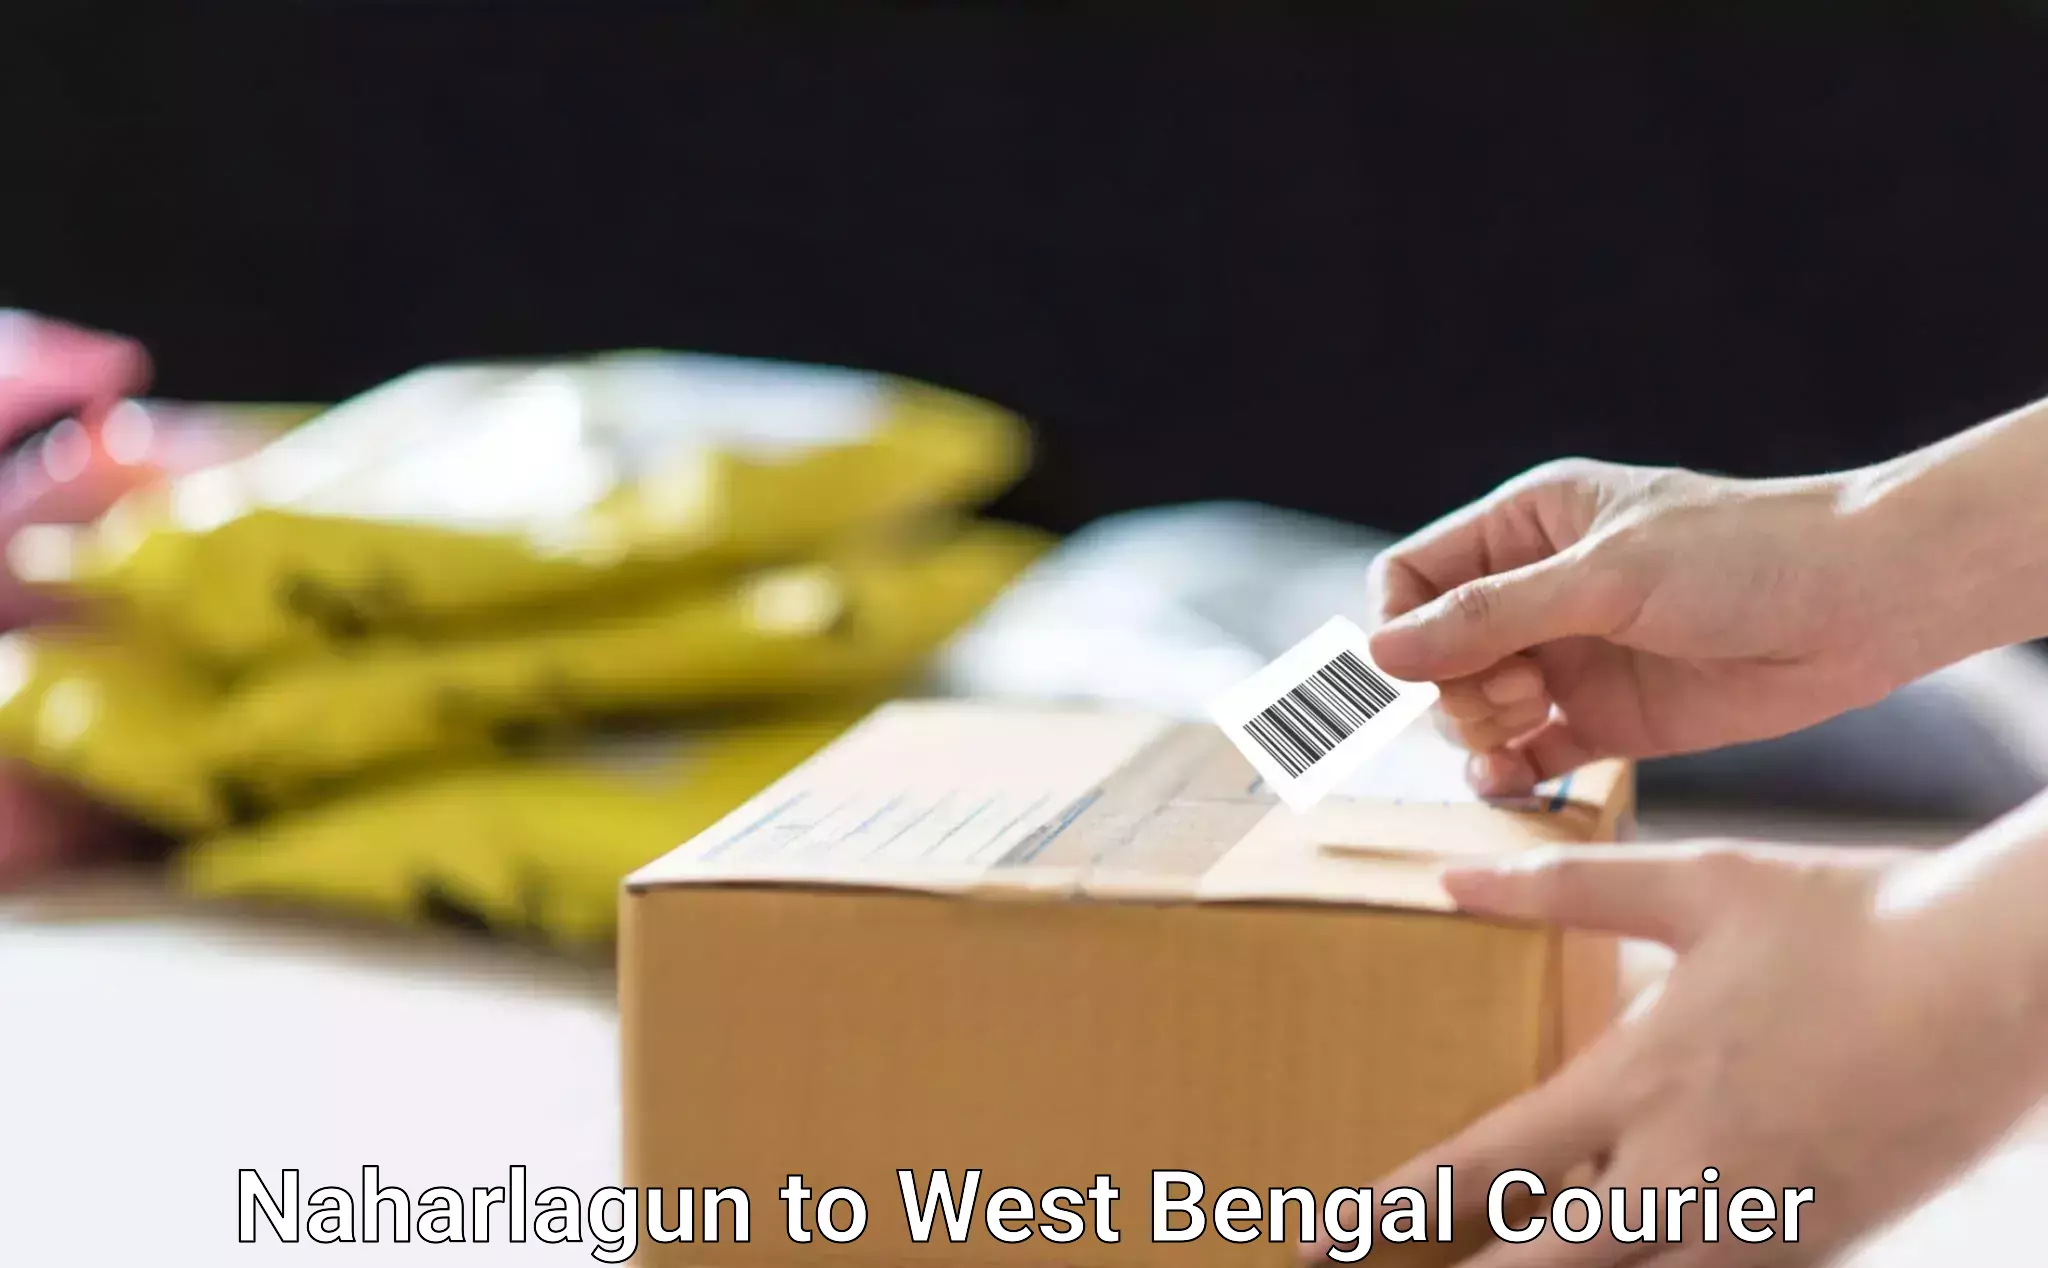 Customer-focused courier Naharlagun to West Bengal